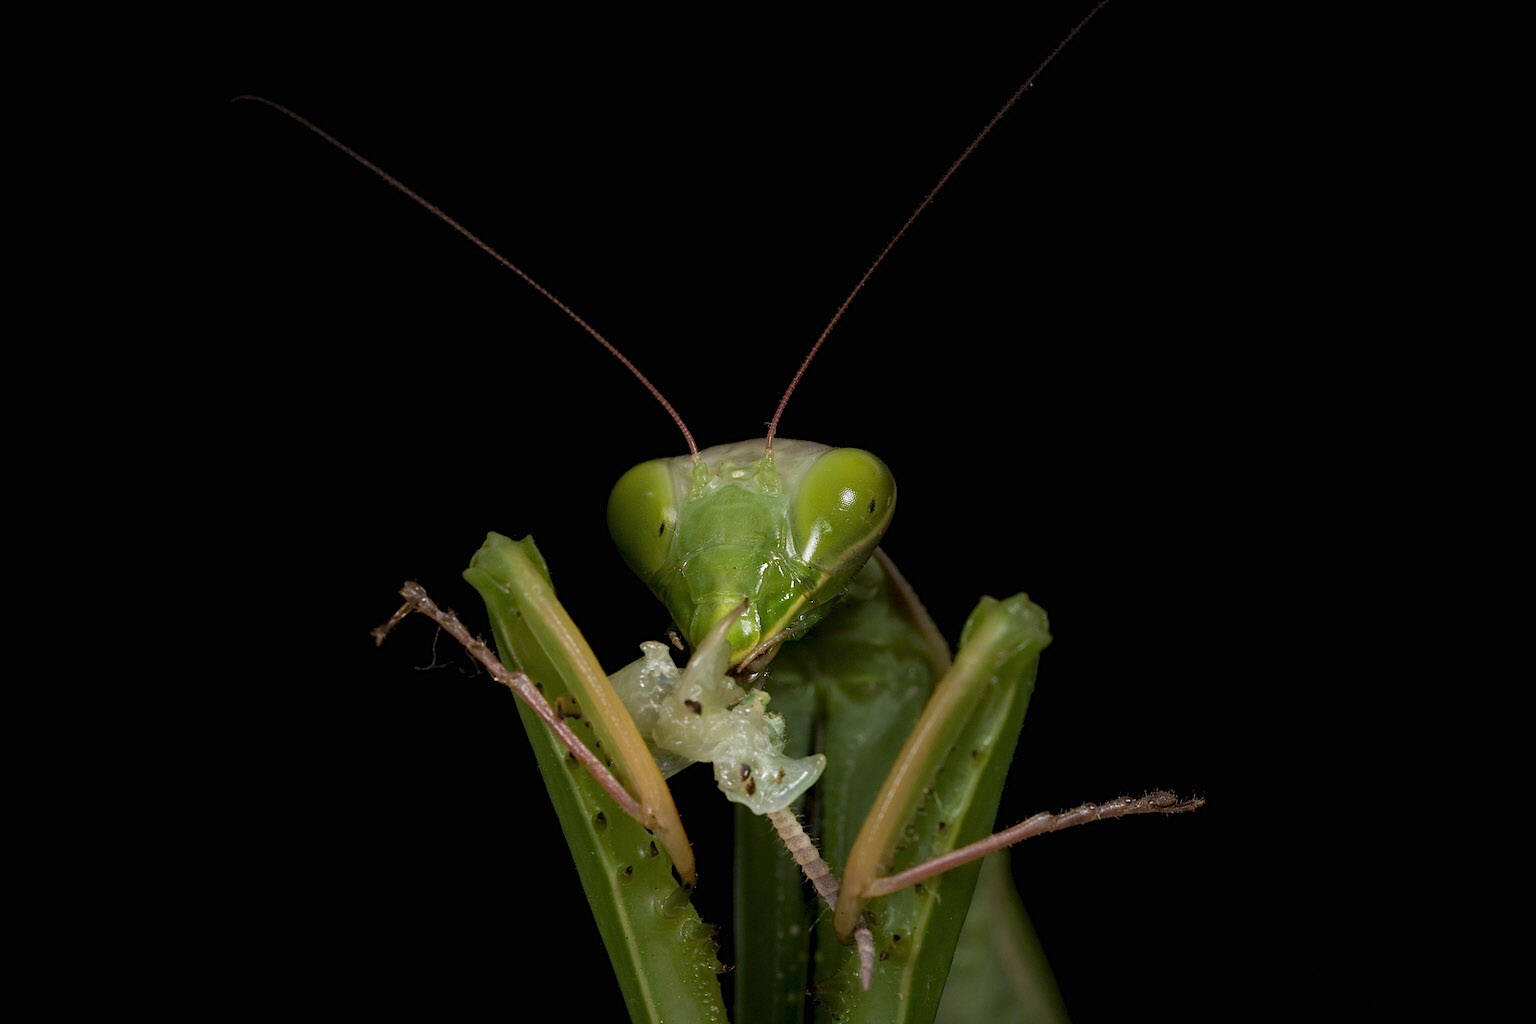 A praying mantis eats the remnants of its mate. In most cases, females that are cannibalistic gain reproductive advantages by laying larger, bigger eggs that survive better than those of non-cannibalistic females. Therefore their deceased mates also gain reproductive advantages.(Oliver Koemmerling / Wikimedia)